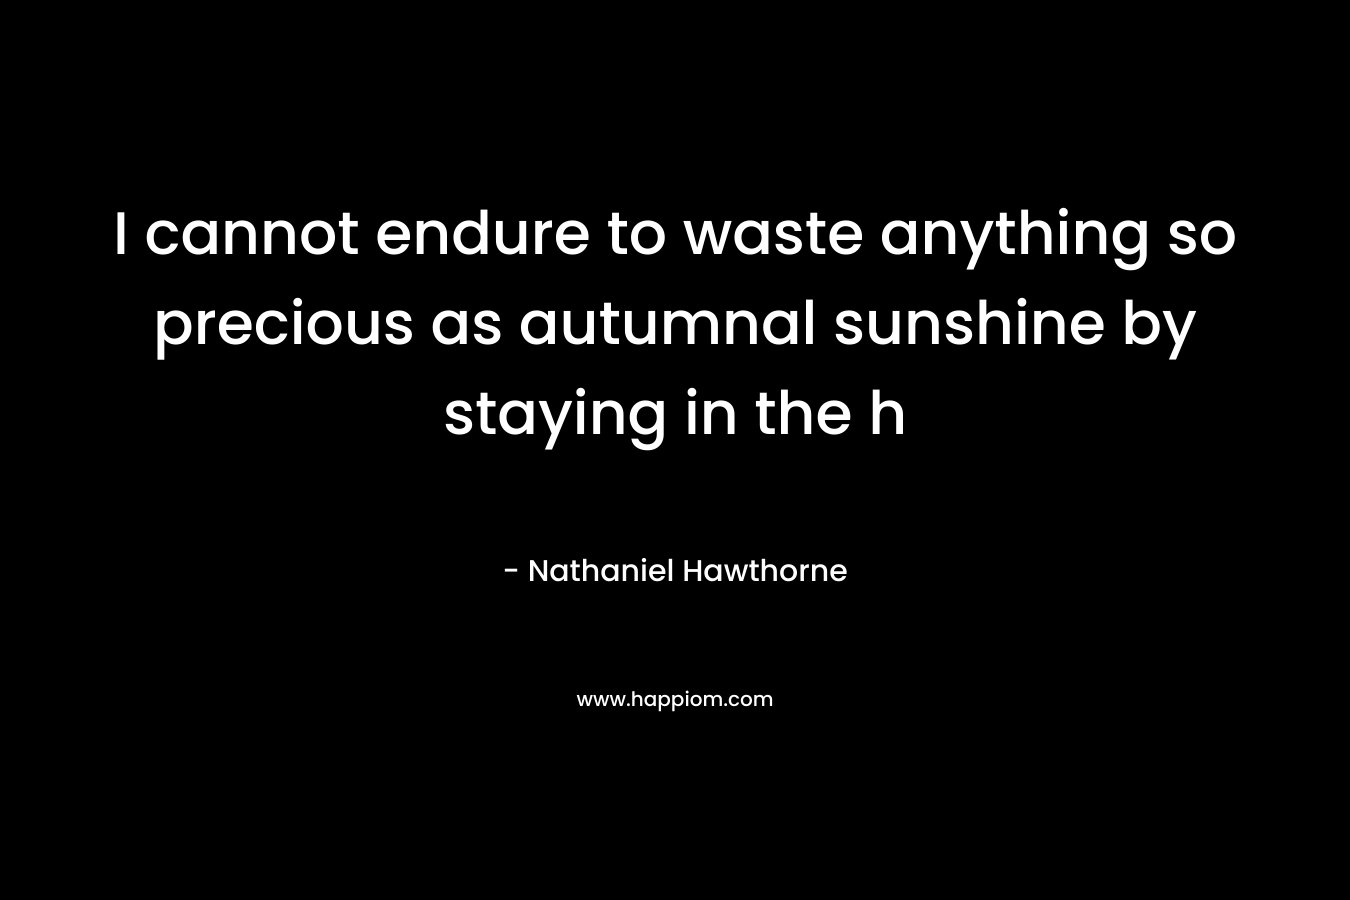 I cannot endure to waste anything so precious as autumnal sunshine by staying in the h – Nathaniel Hawthorne